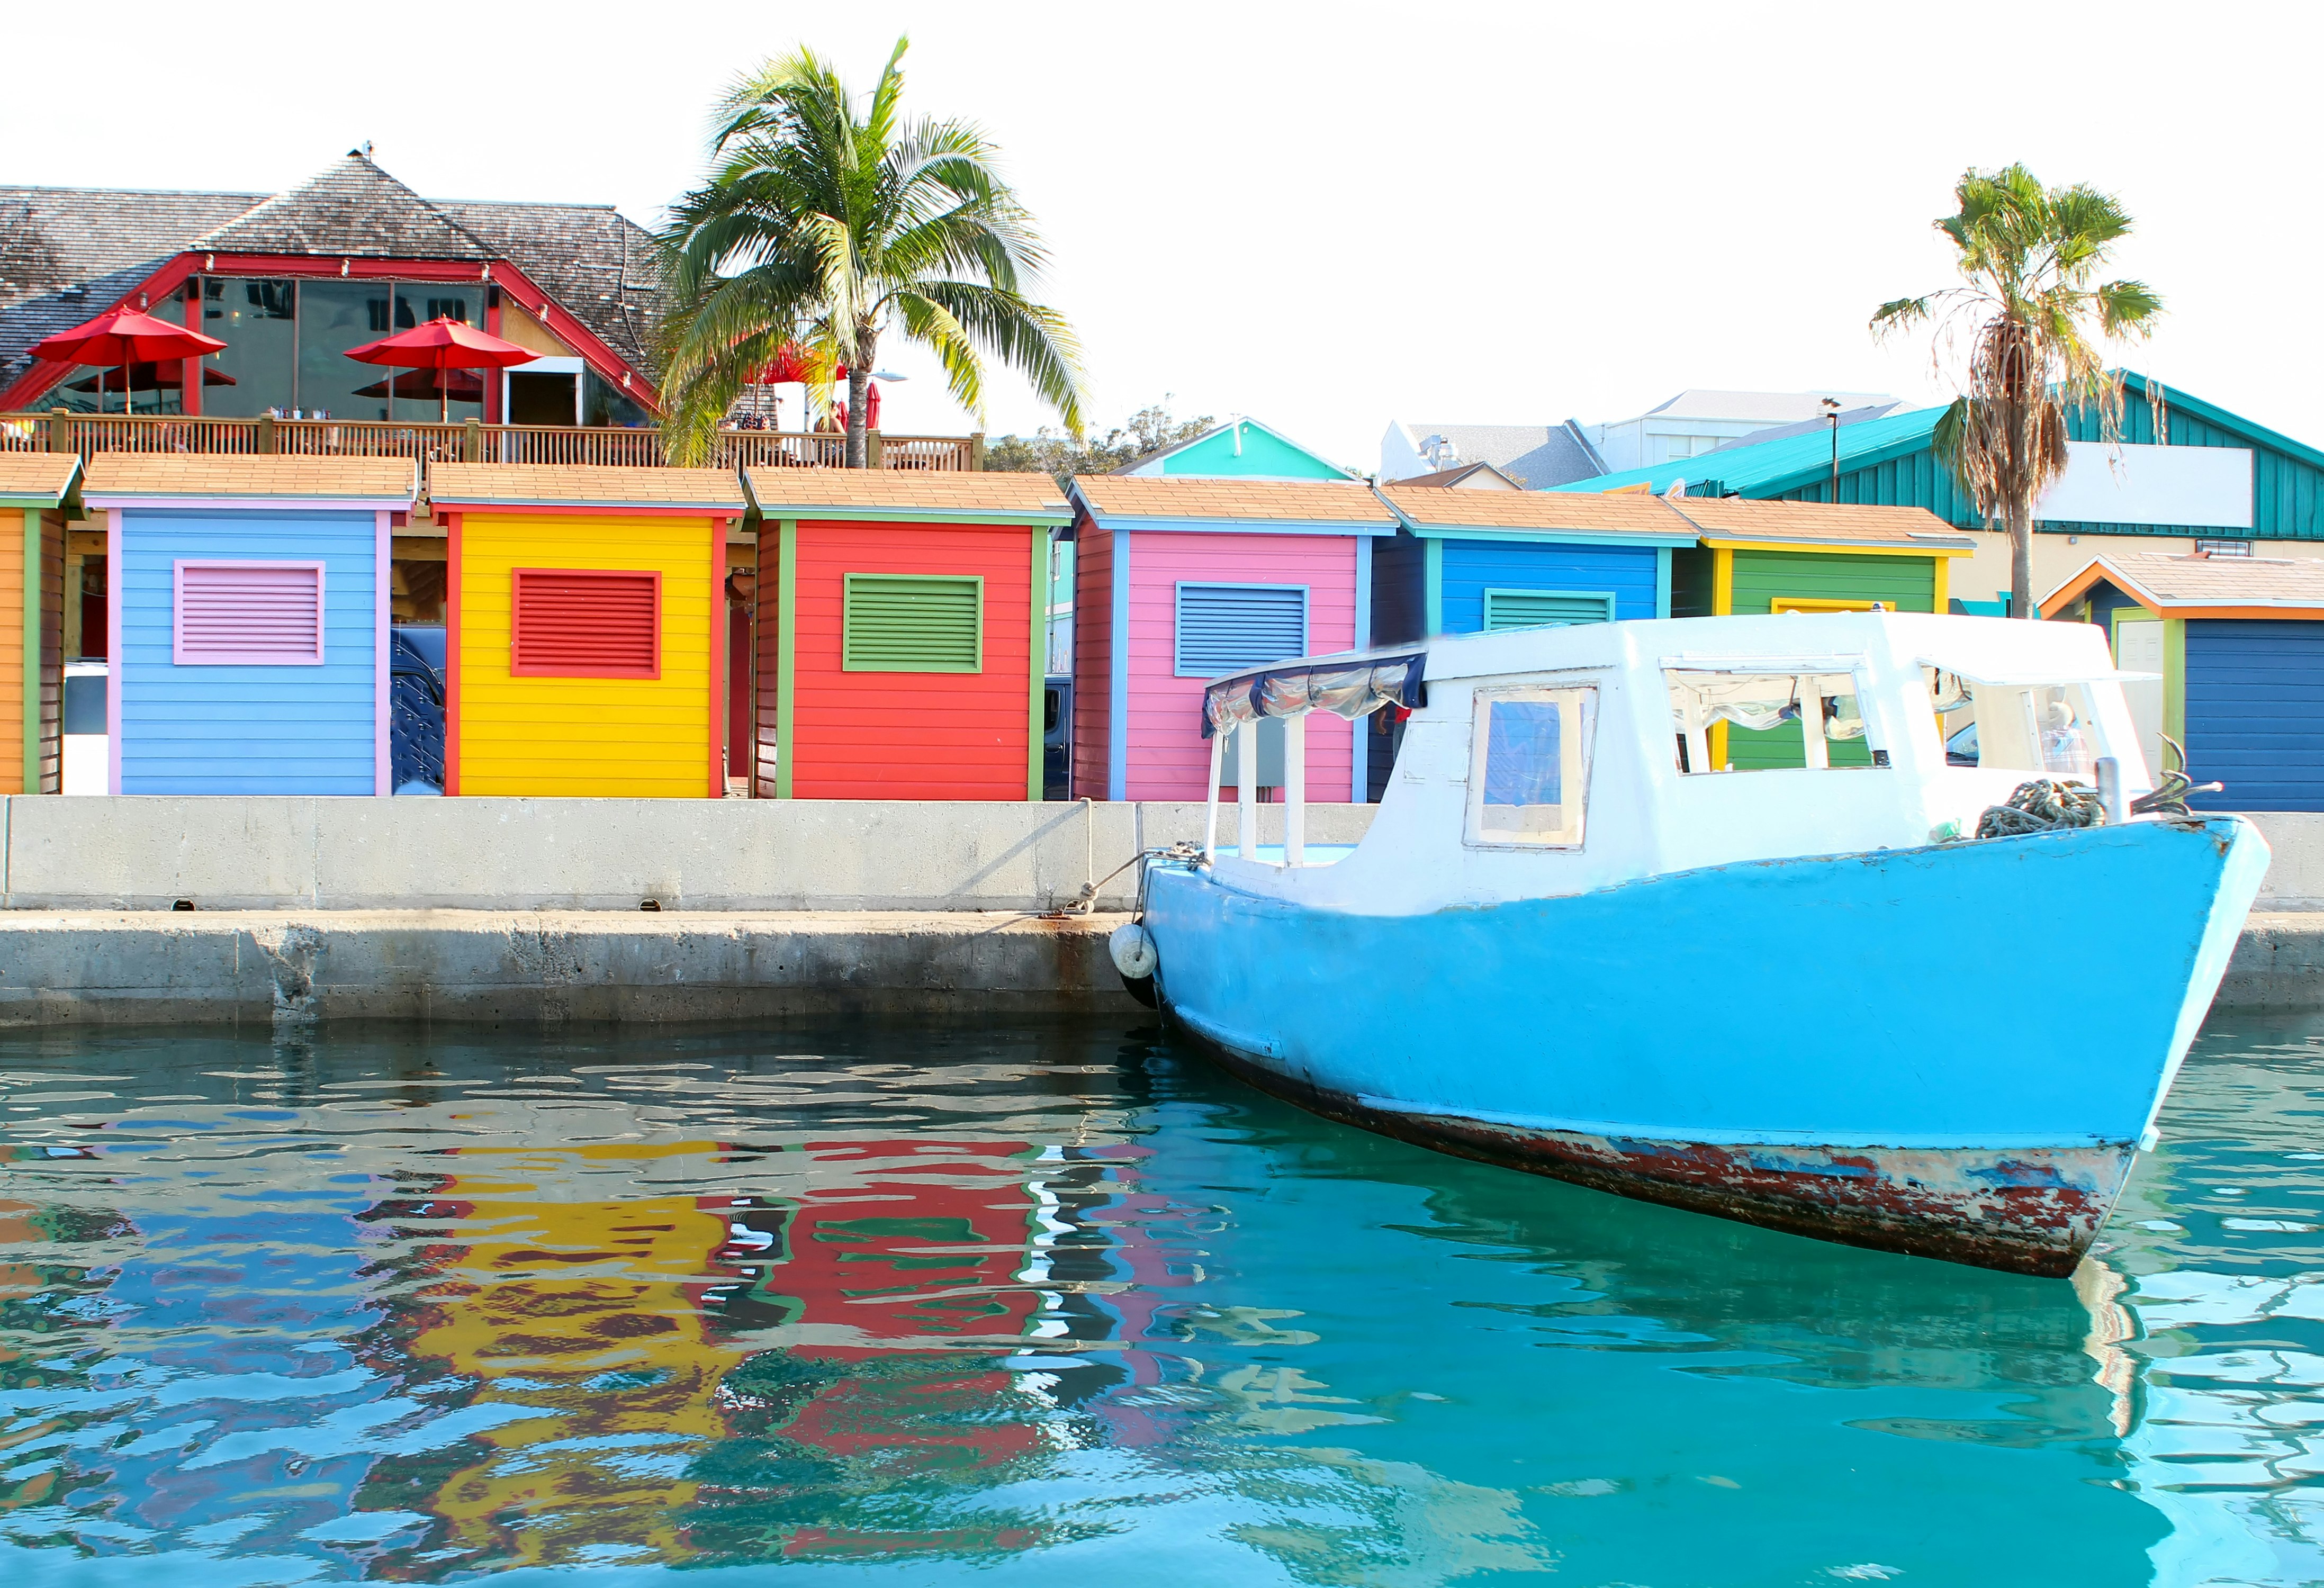 A colorful image of the waterfront area in downtown Nassau showing a water taxi and several huts